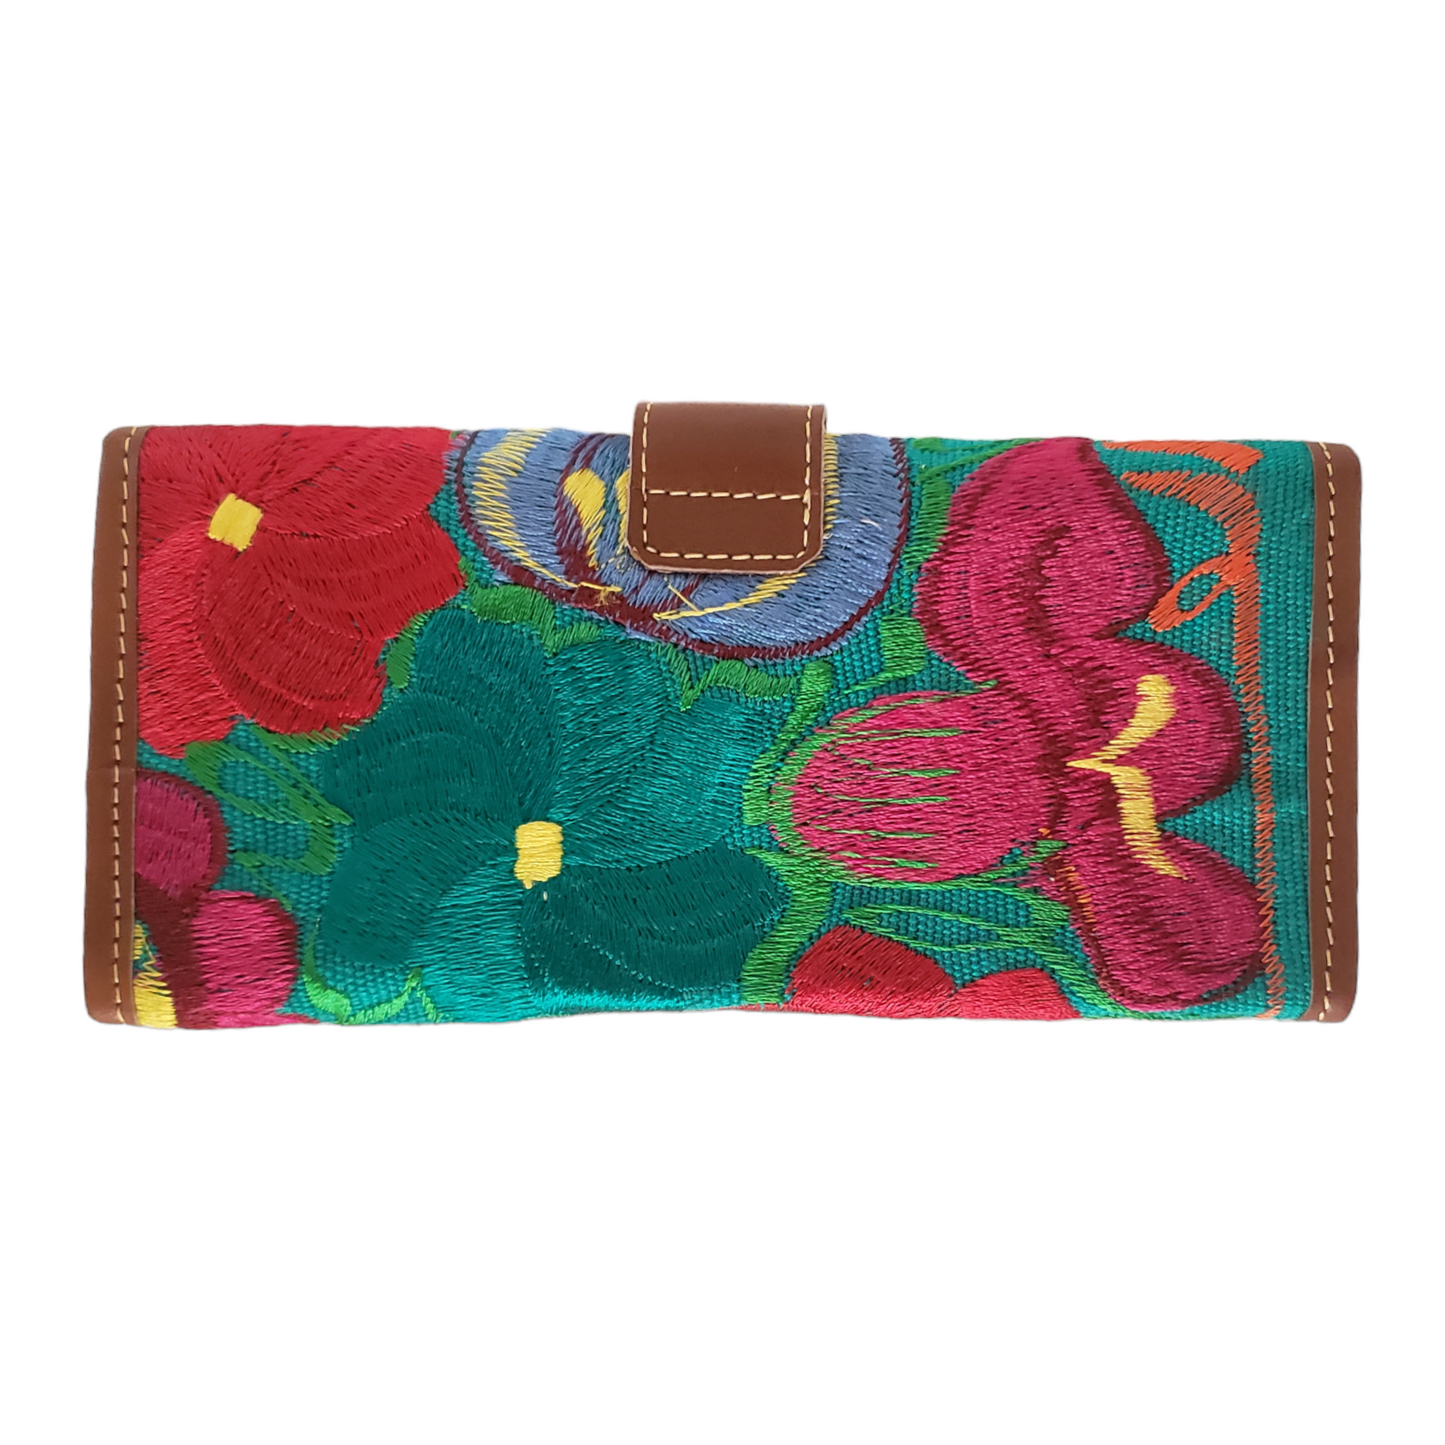 Handmade Embroidered Floral Wallet from Oaxaca